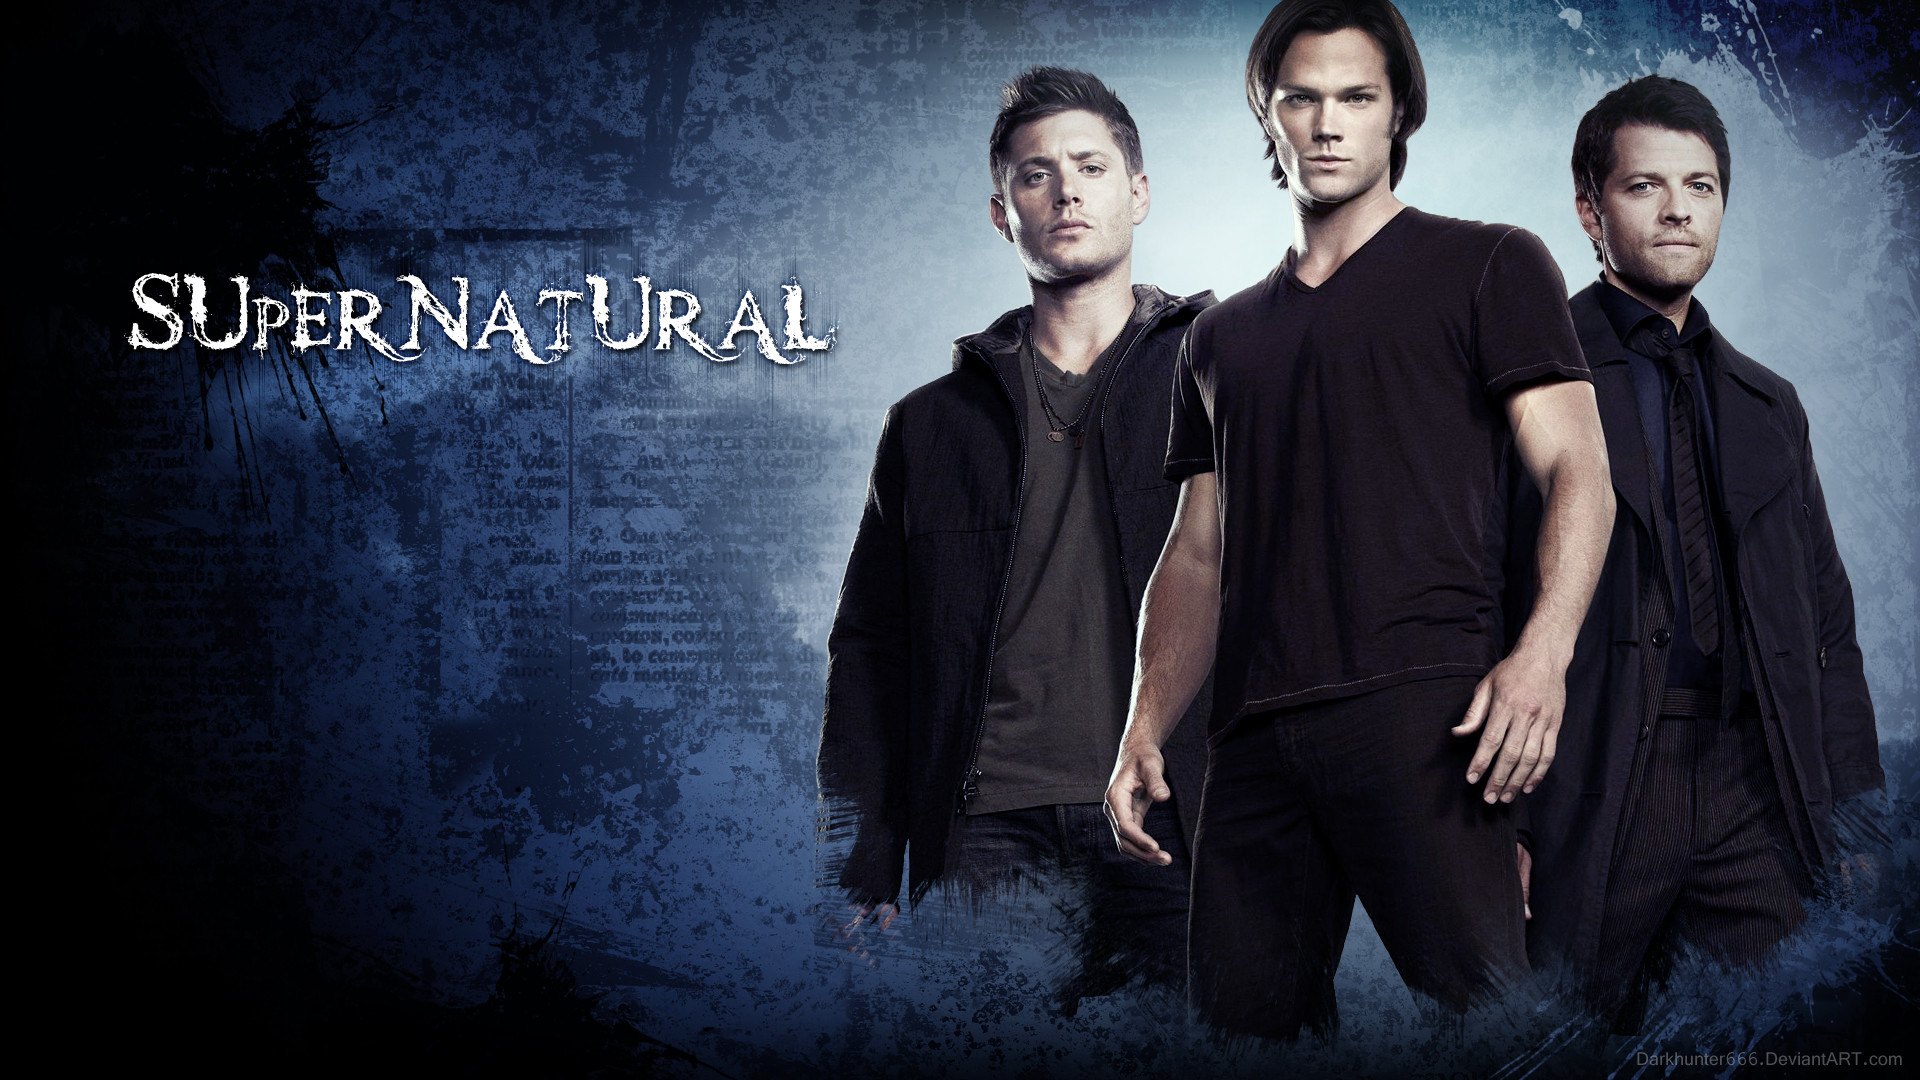 1920x1080 Eager to watch Supernatural season 12 online? Here's a simple trick that  you can use to watch all your favorite TV shows without any hassle.